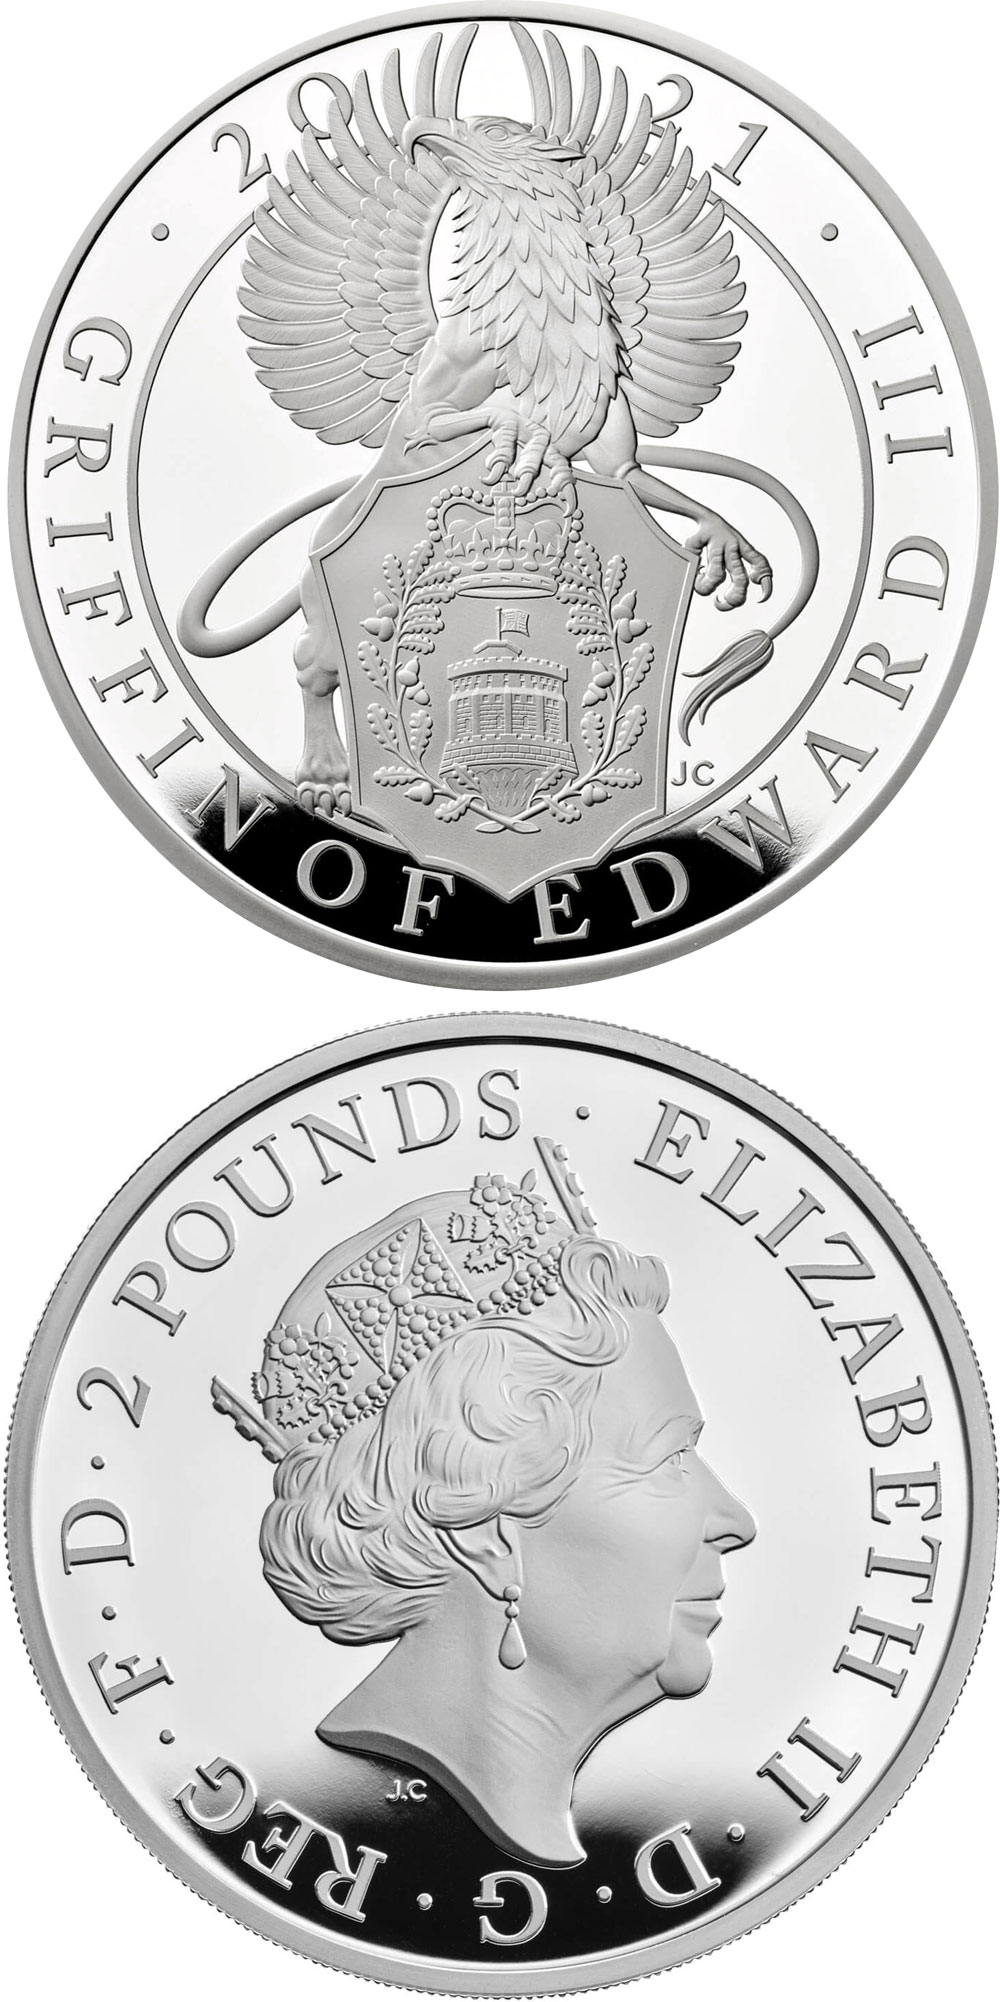 Image of 2 pounds coin - The Griffin of Edward III | United Kingdom 2021.  The Silver coin is of Proof quality.